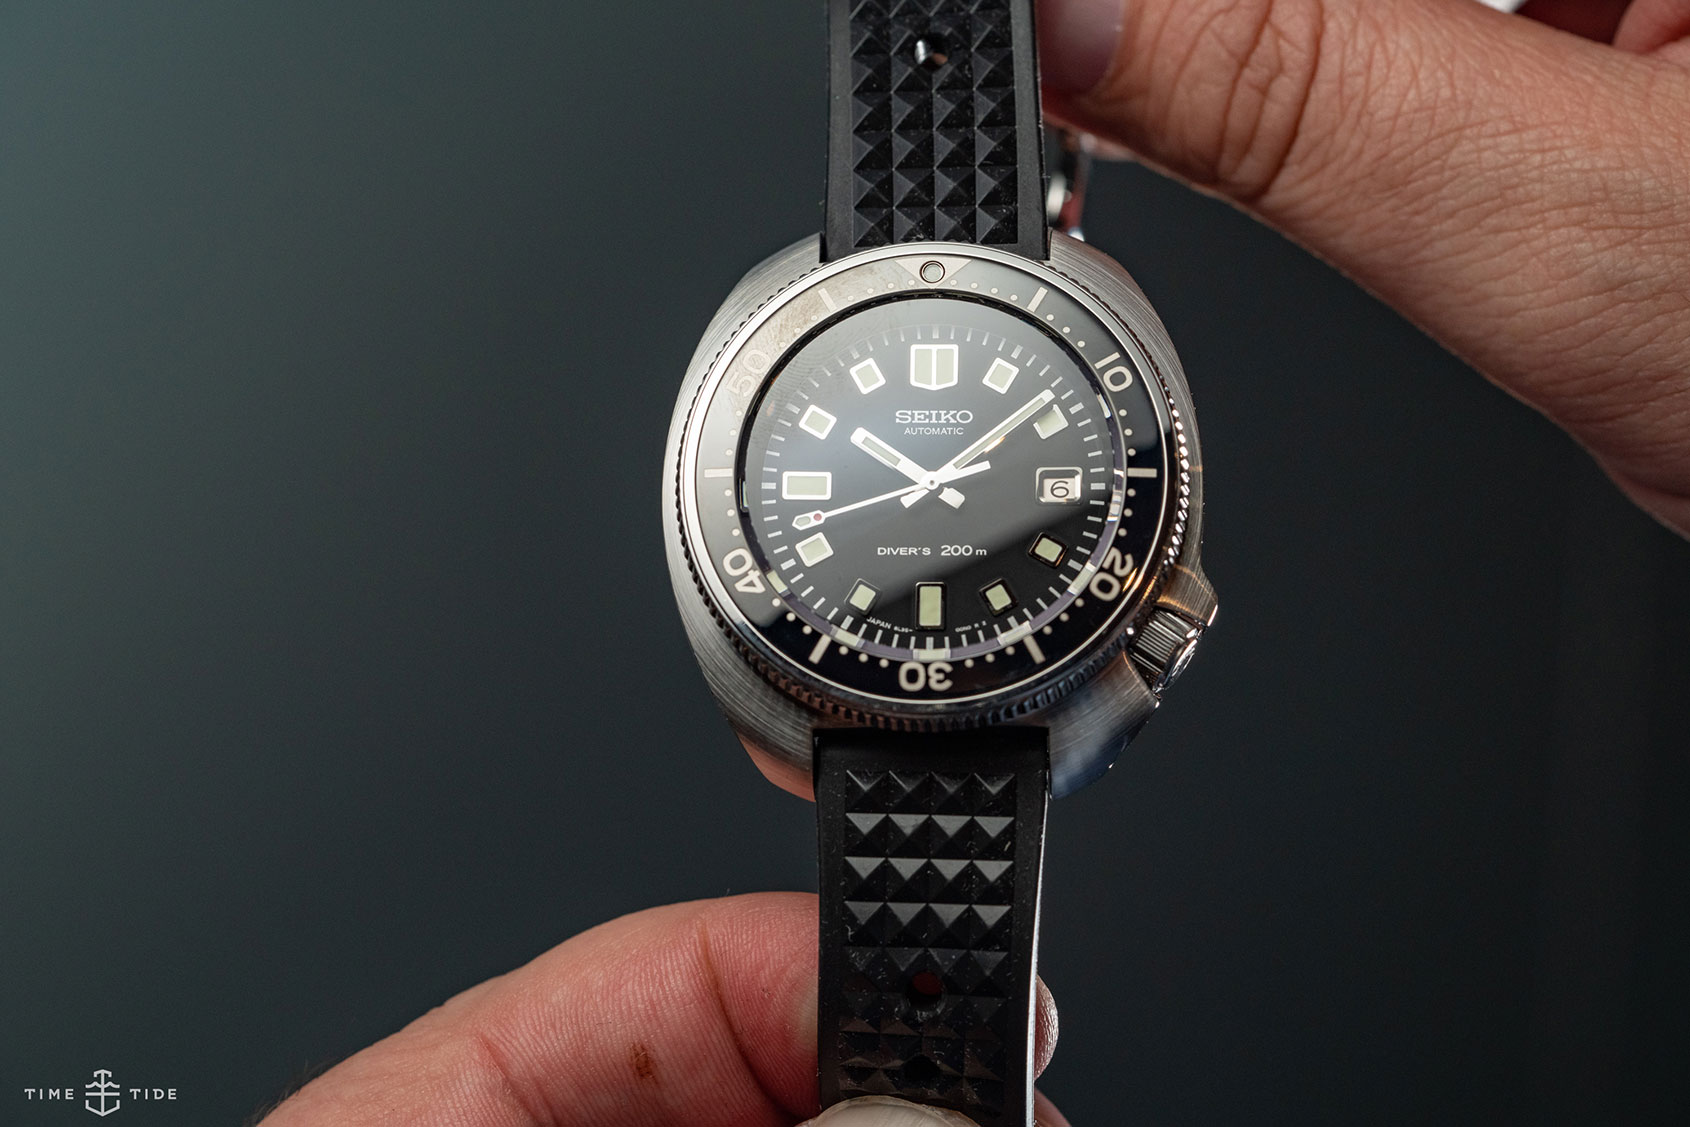 Was this the greatest limited edition Seiko of 2019?